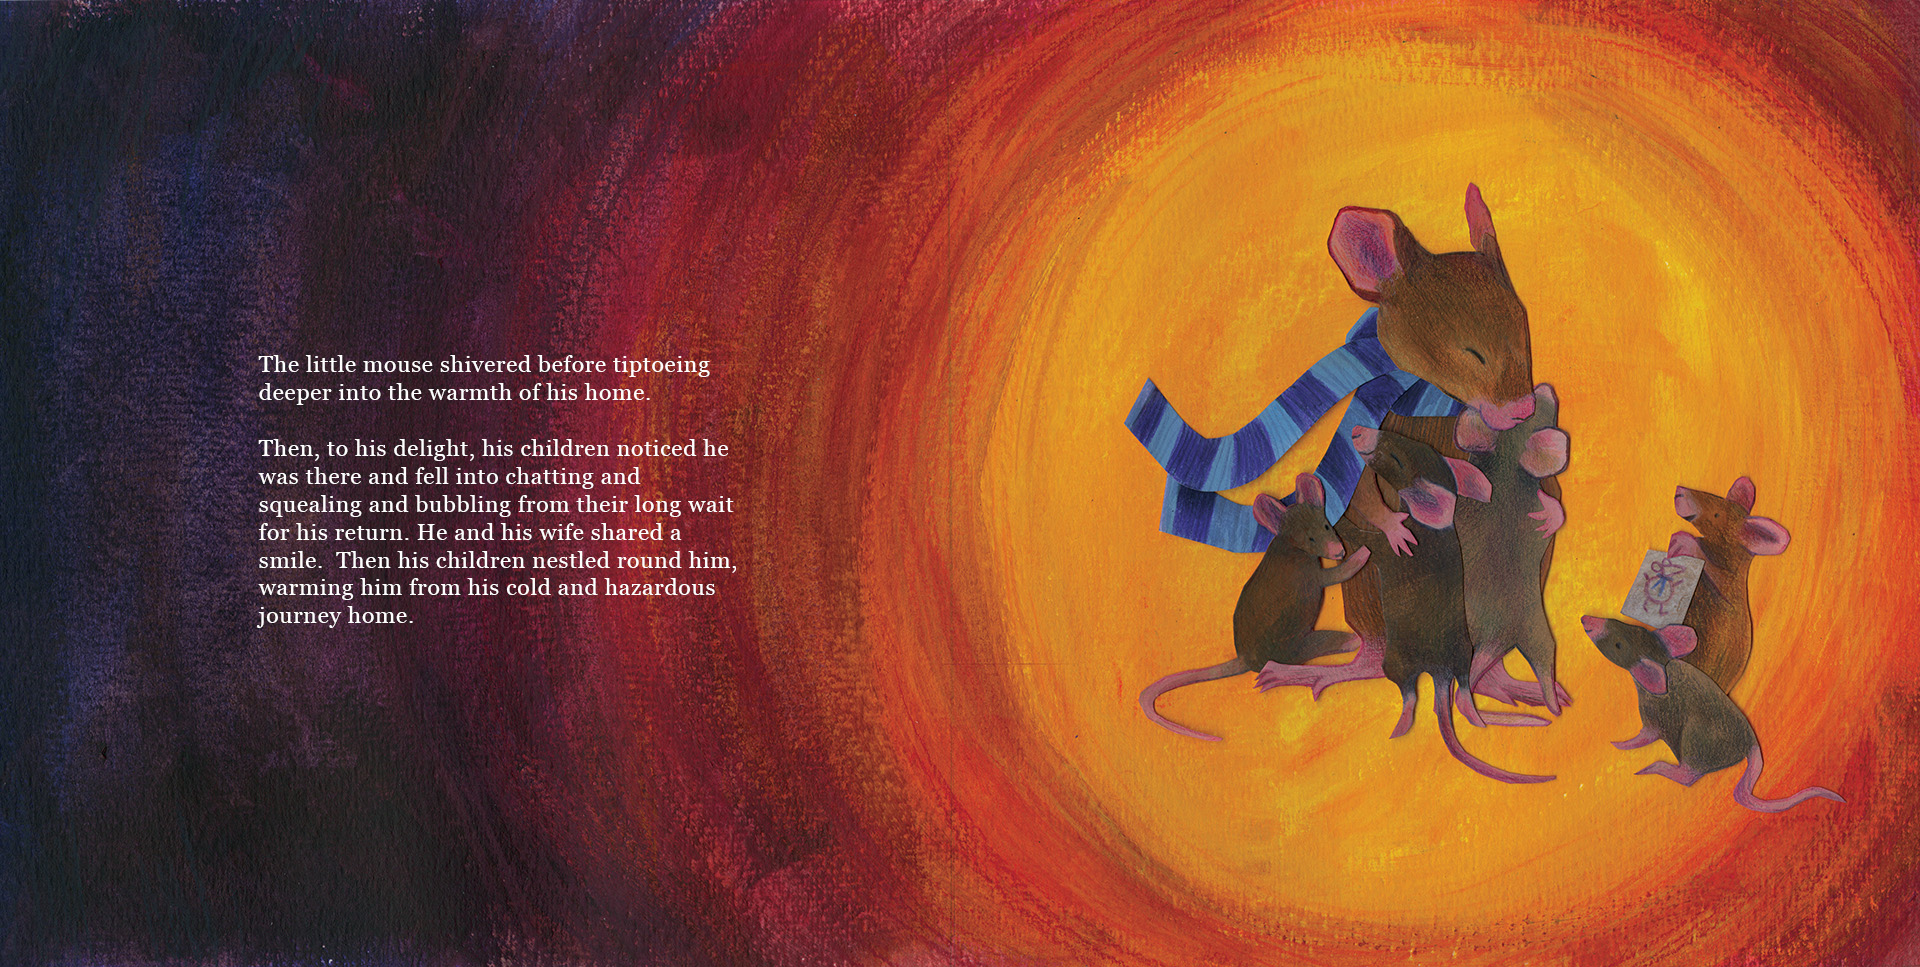 Wittington arrives home: a double page spread from my children’s picture book about a mouse on his way home from work